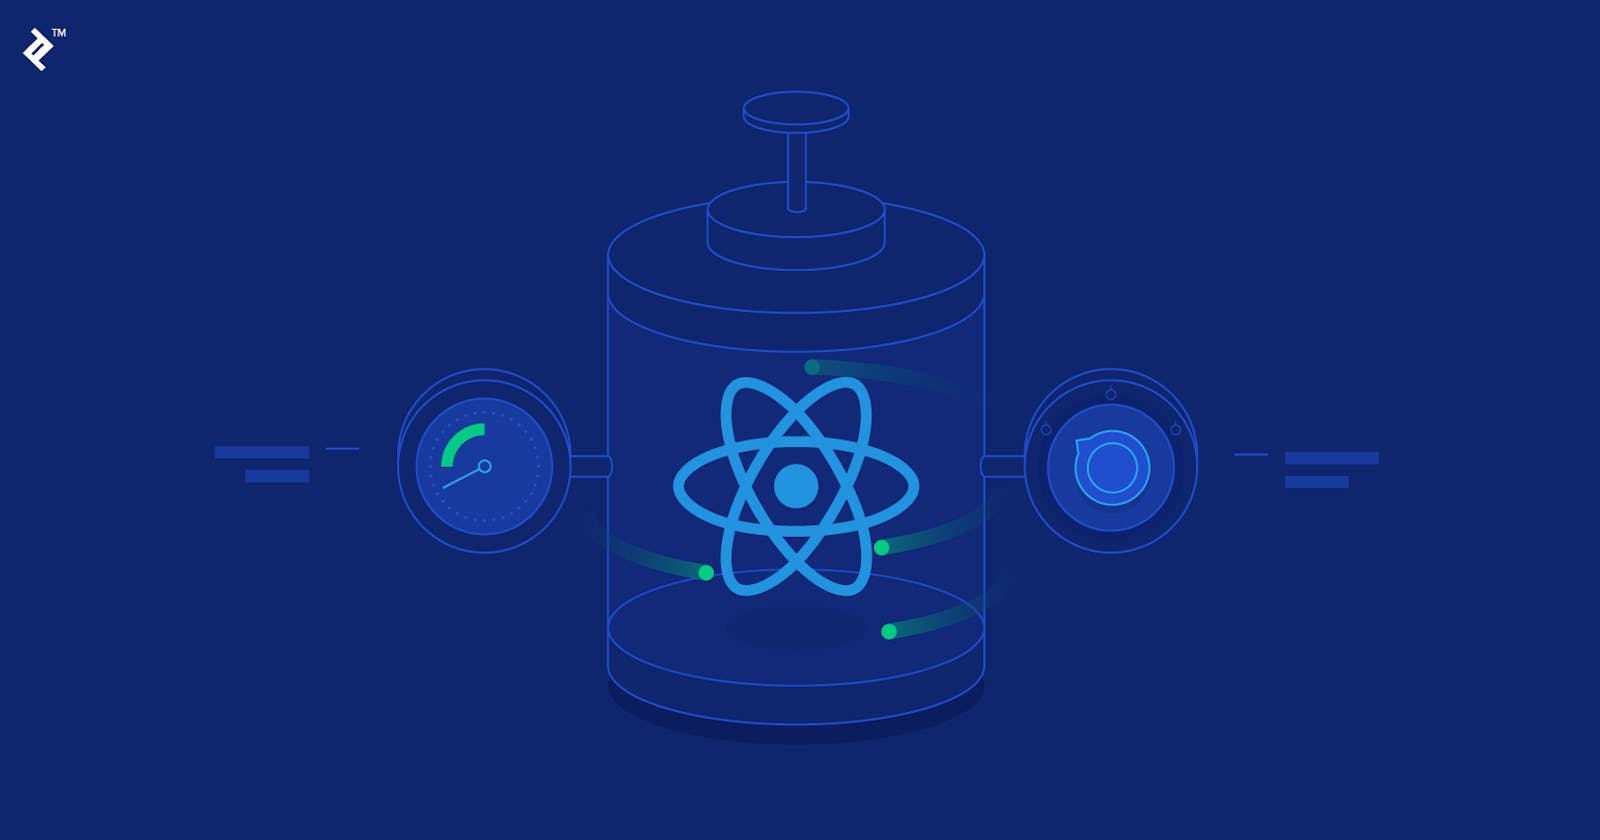 Let's talk about react  performance ⚛️